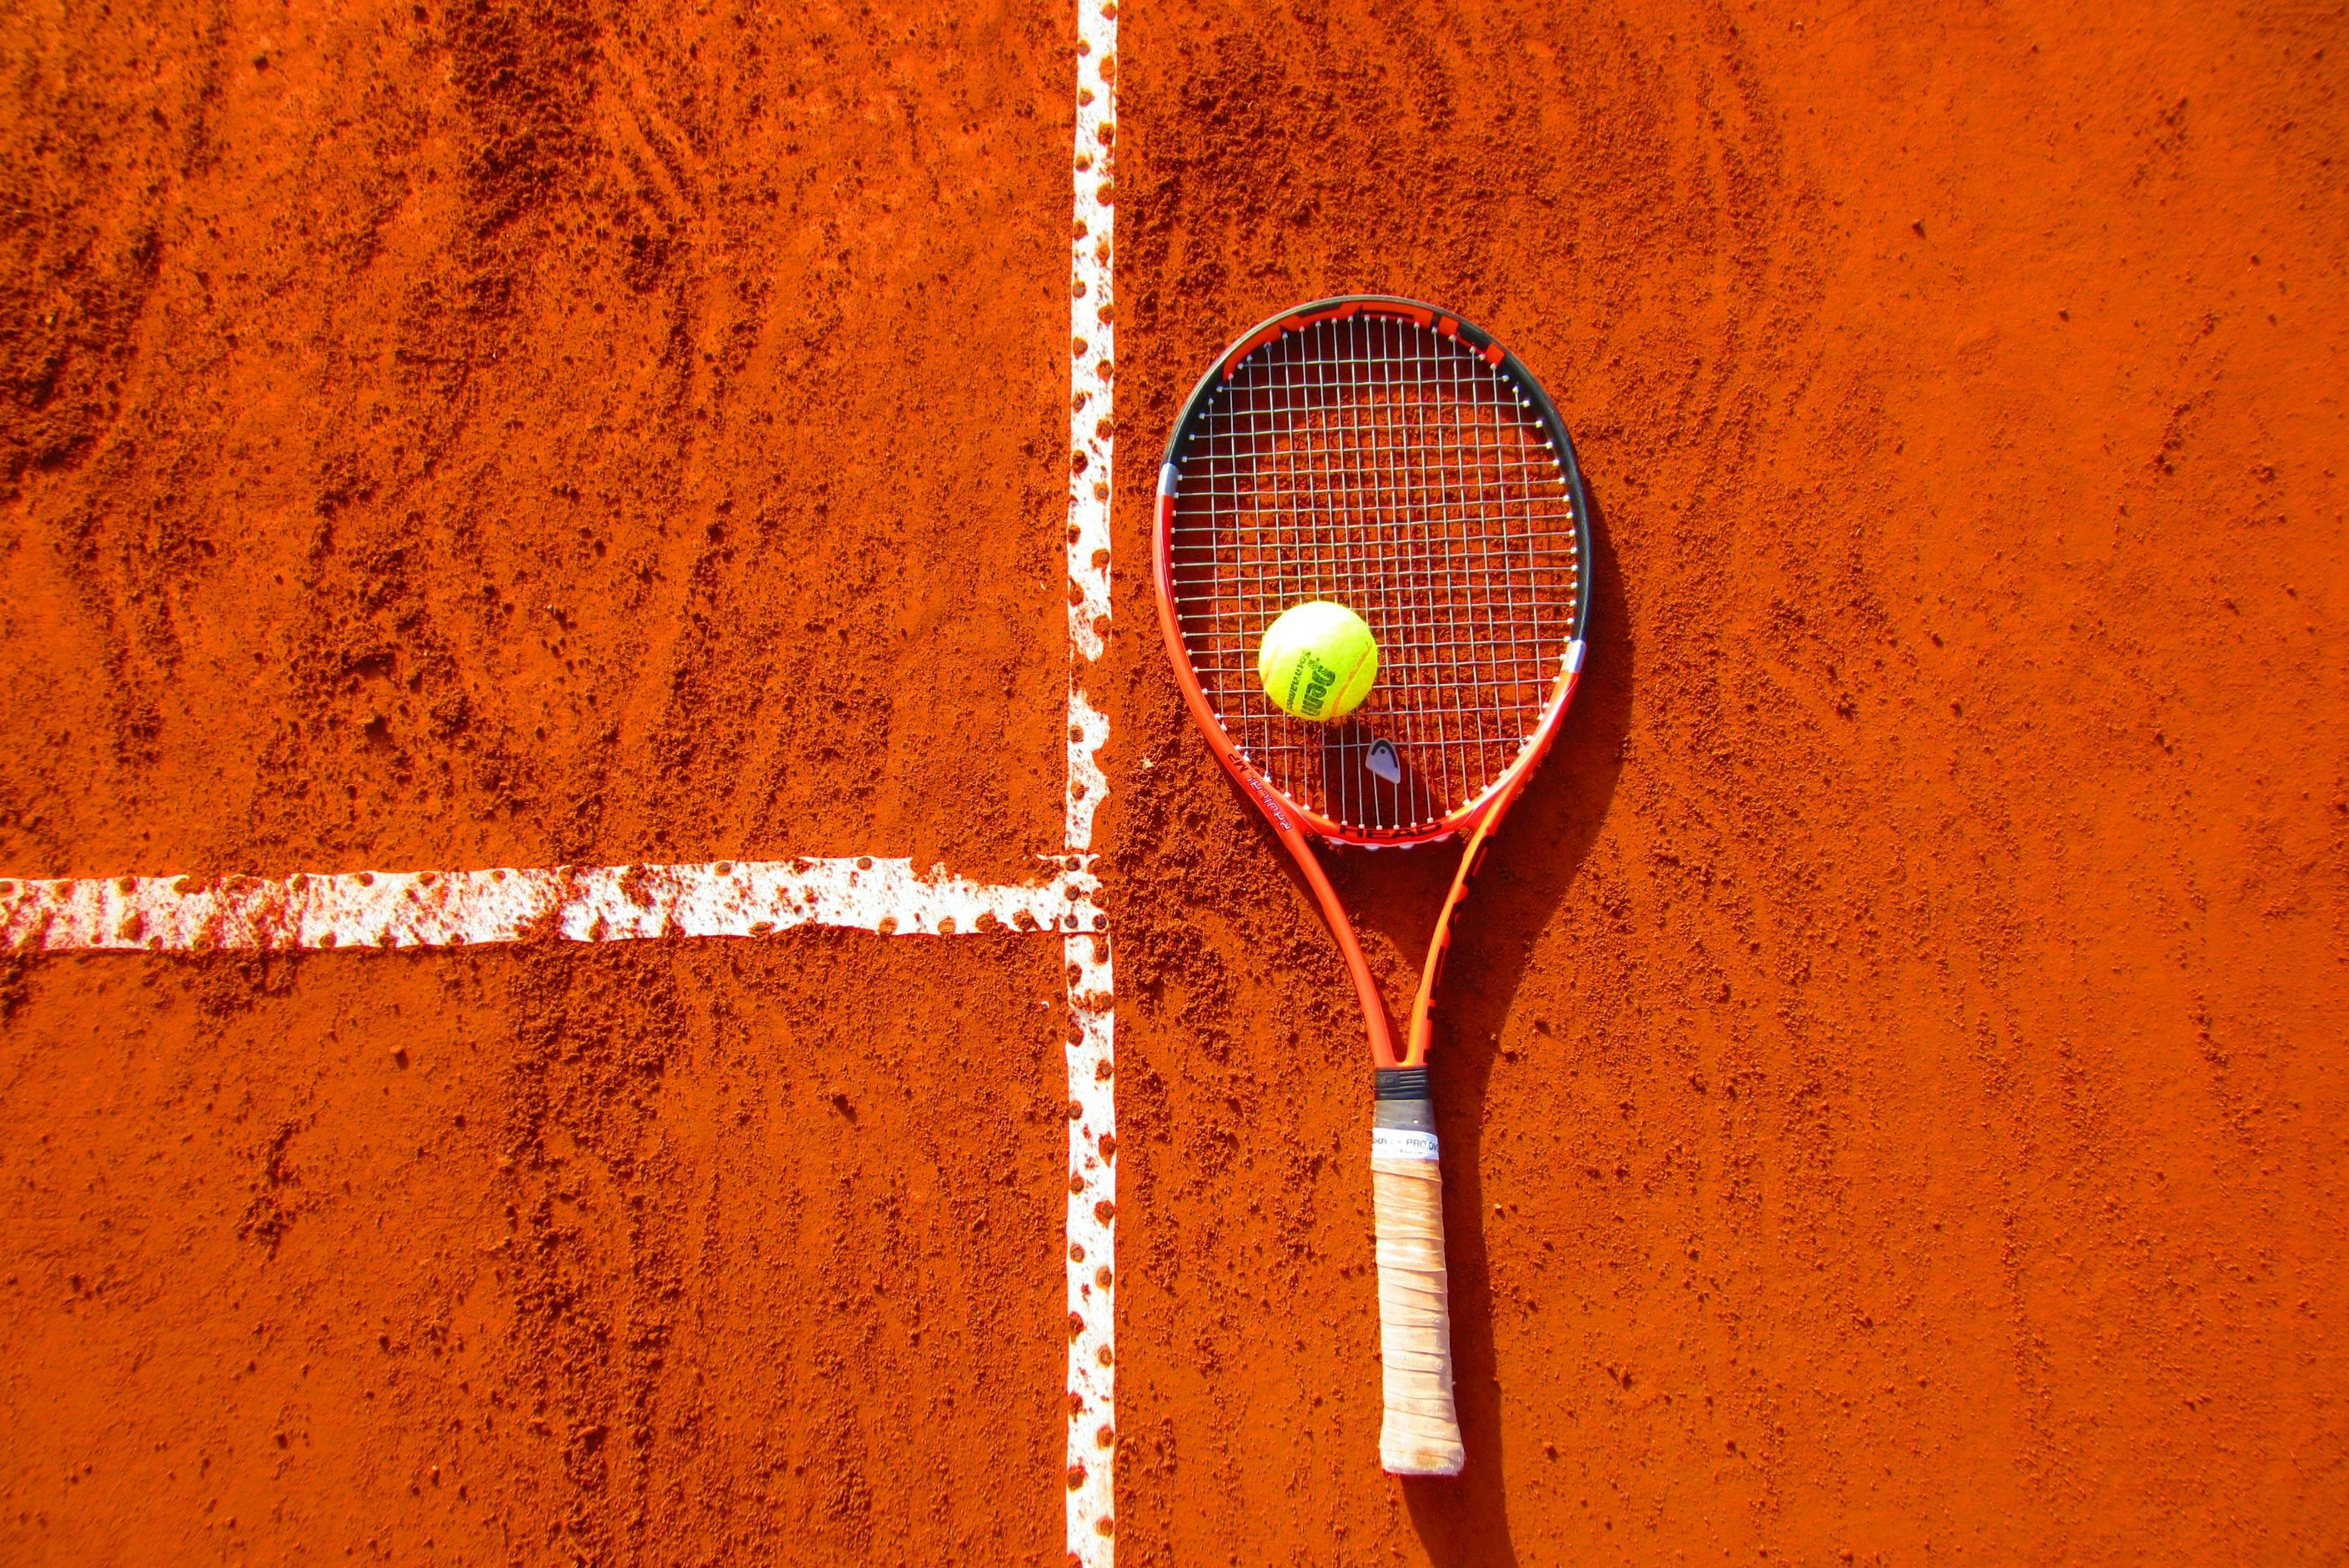 Wallpaper ID 237317  the view of a white tennis line markings on a tennis  court tennis line markings 4k wallpaper free download